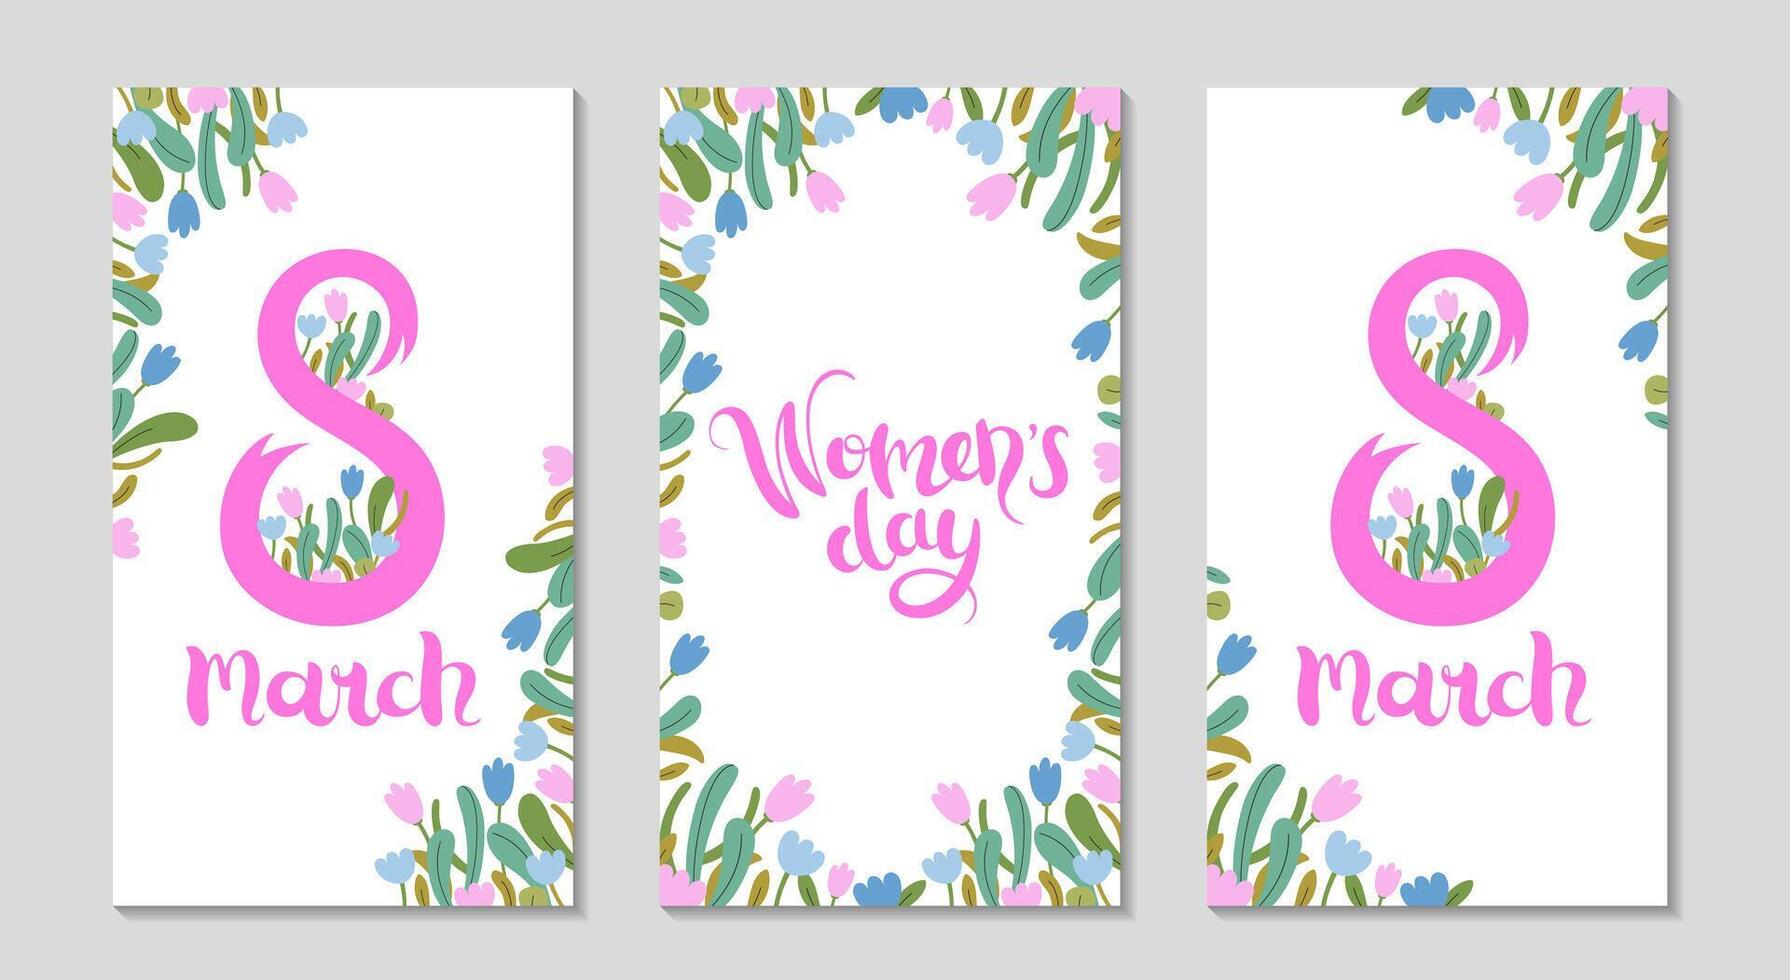 International Women's day long greeting stories post set. Floral festive frame for Social media. Spring holidays vertical templates. 8 march lettering. Congratulating background. Vector illustration.